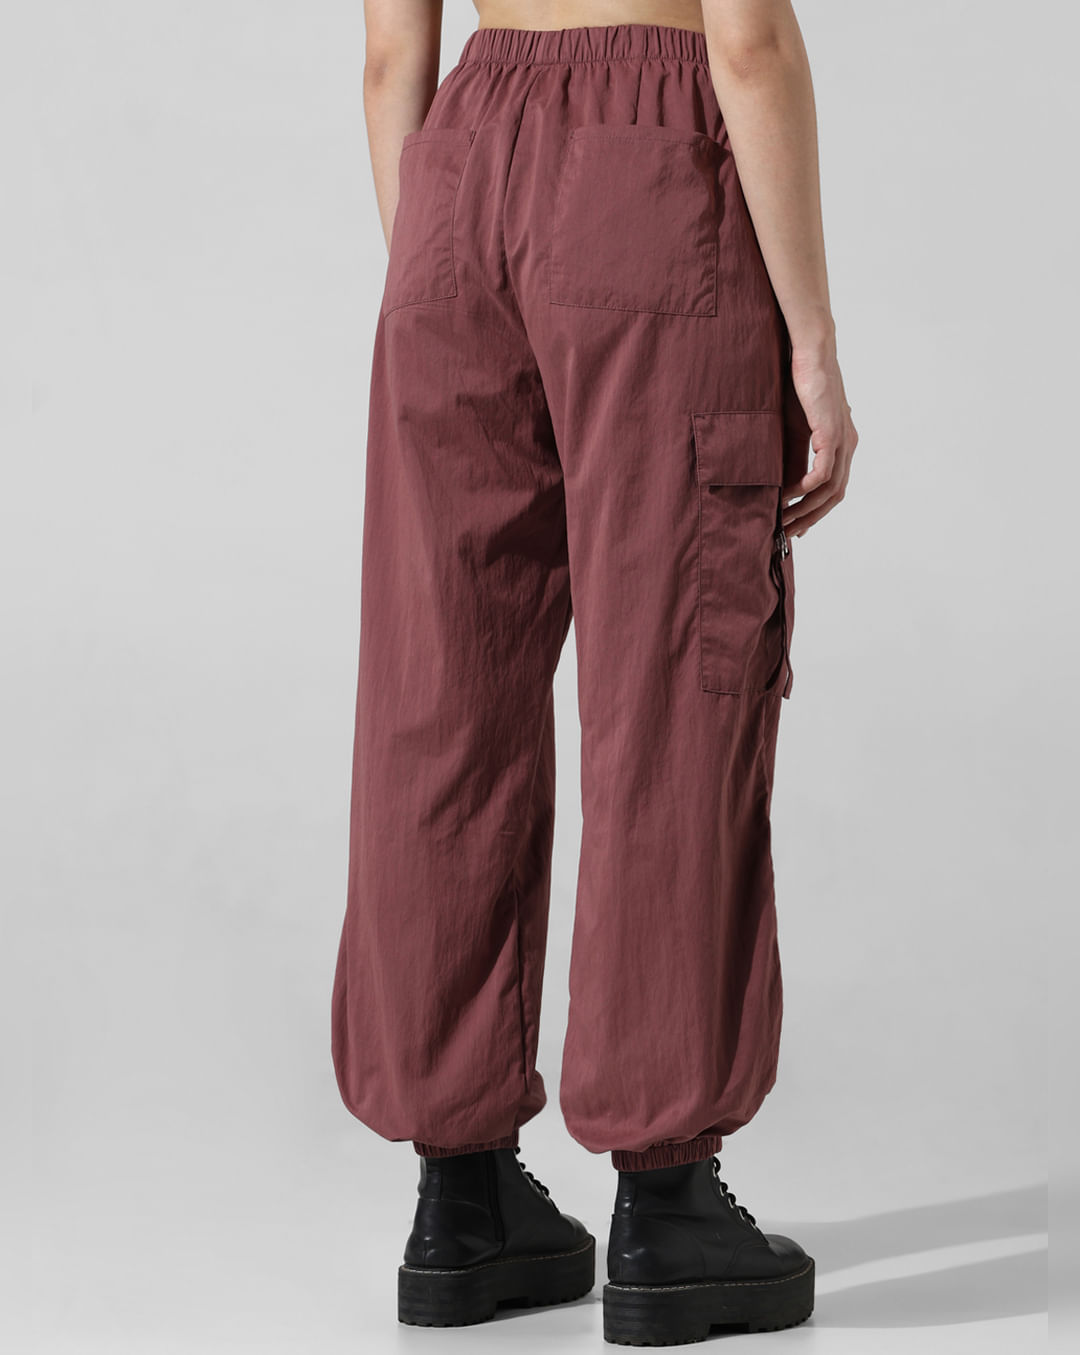 Chocolate Brown Control Stretch Pull On Ankle Pant